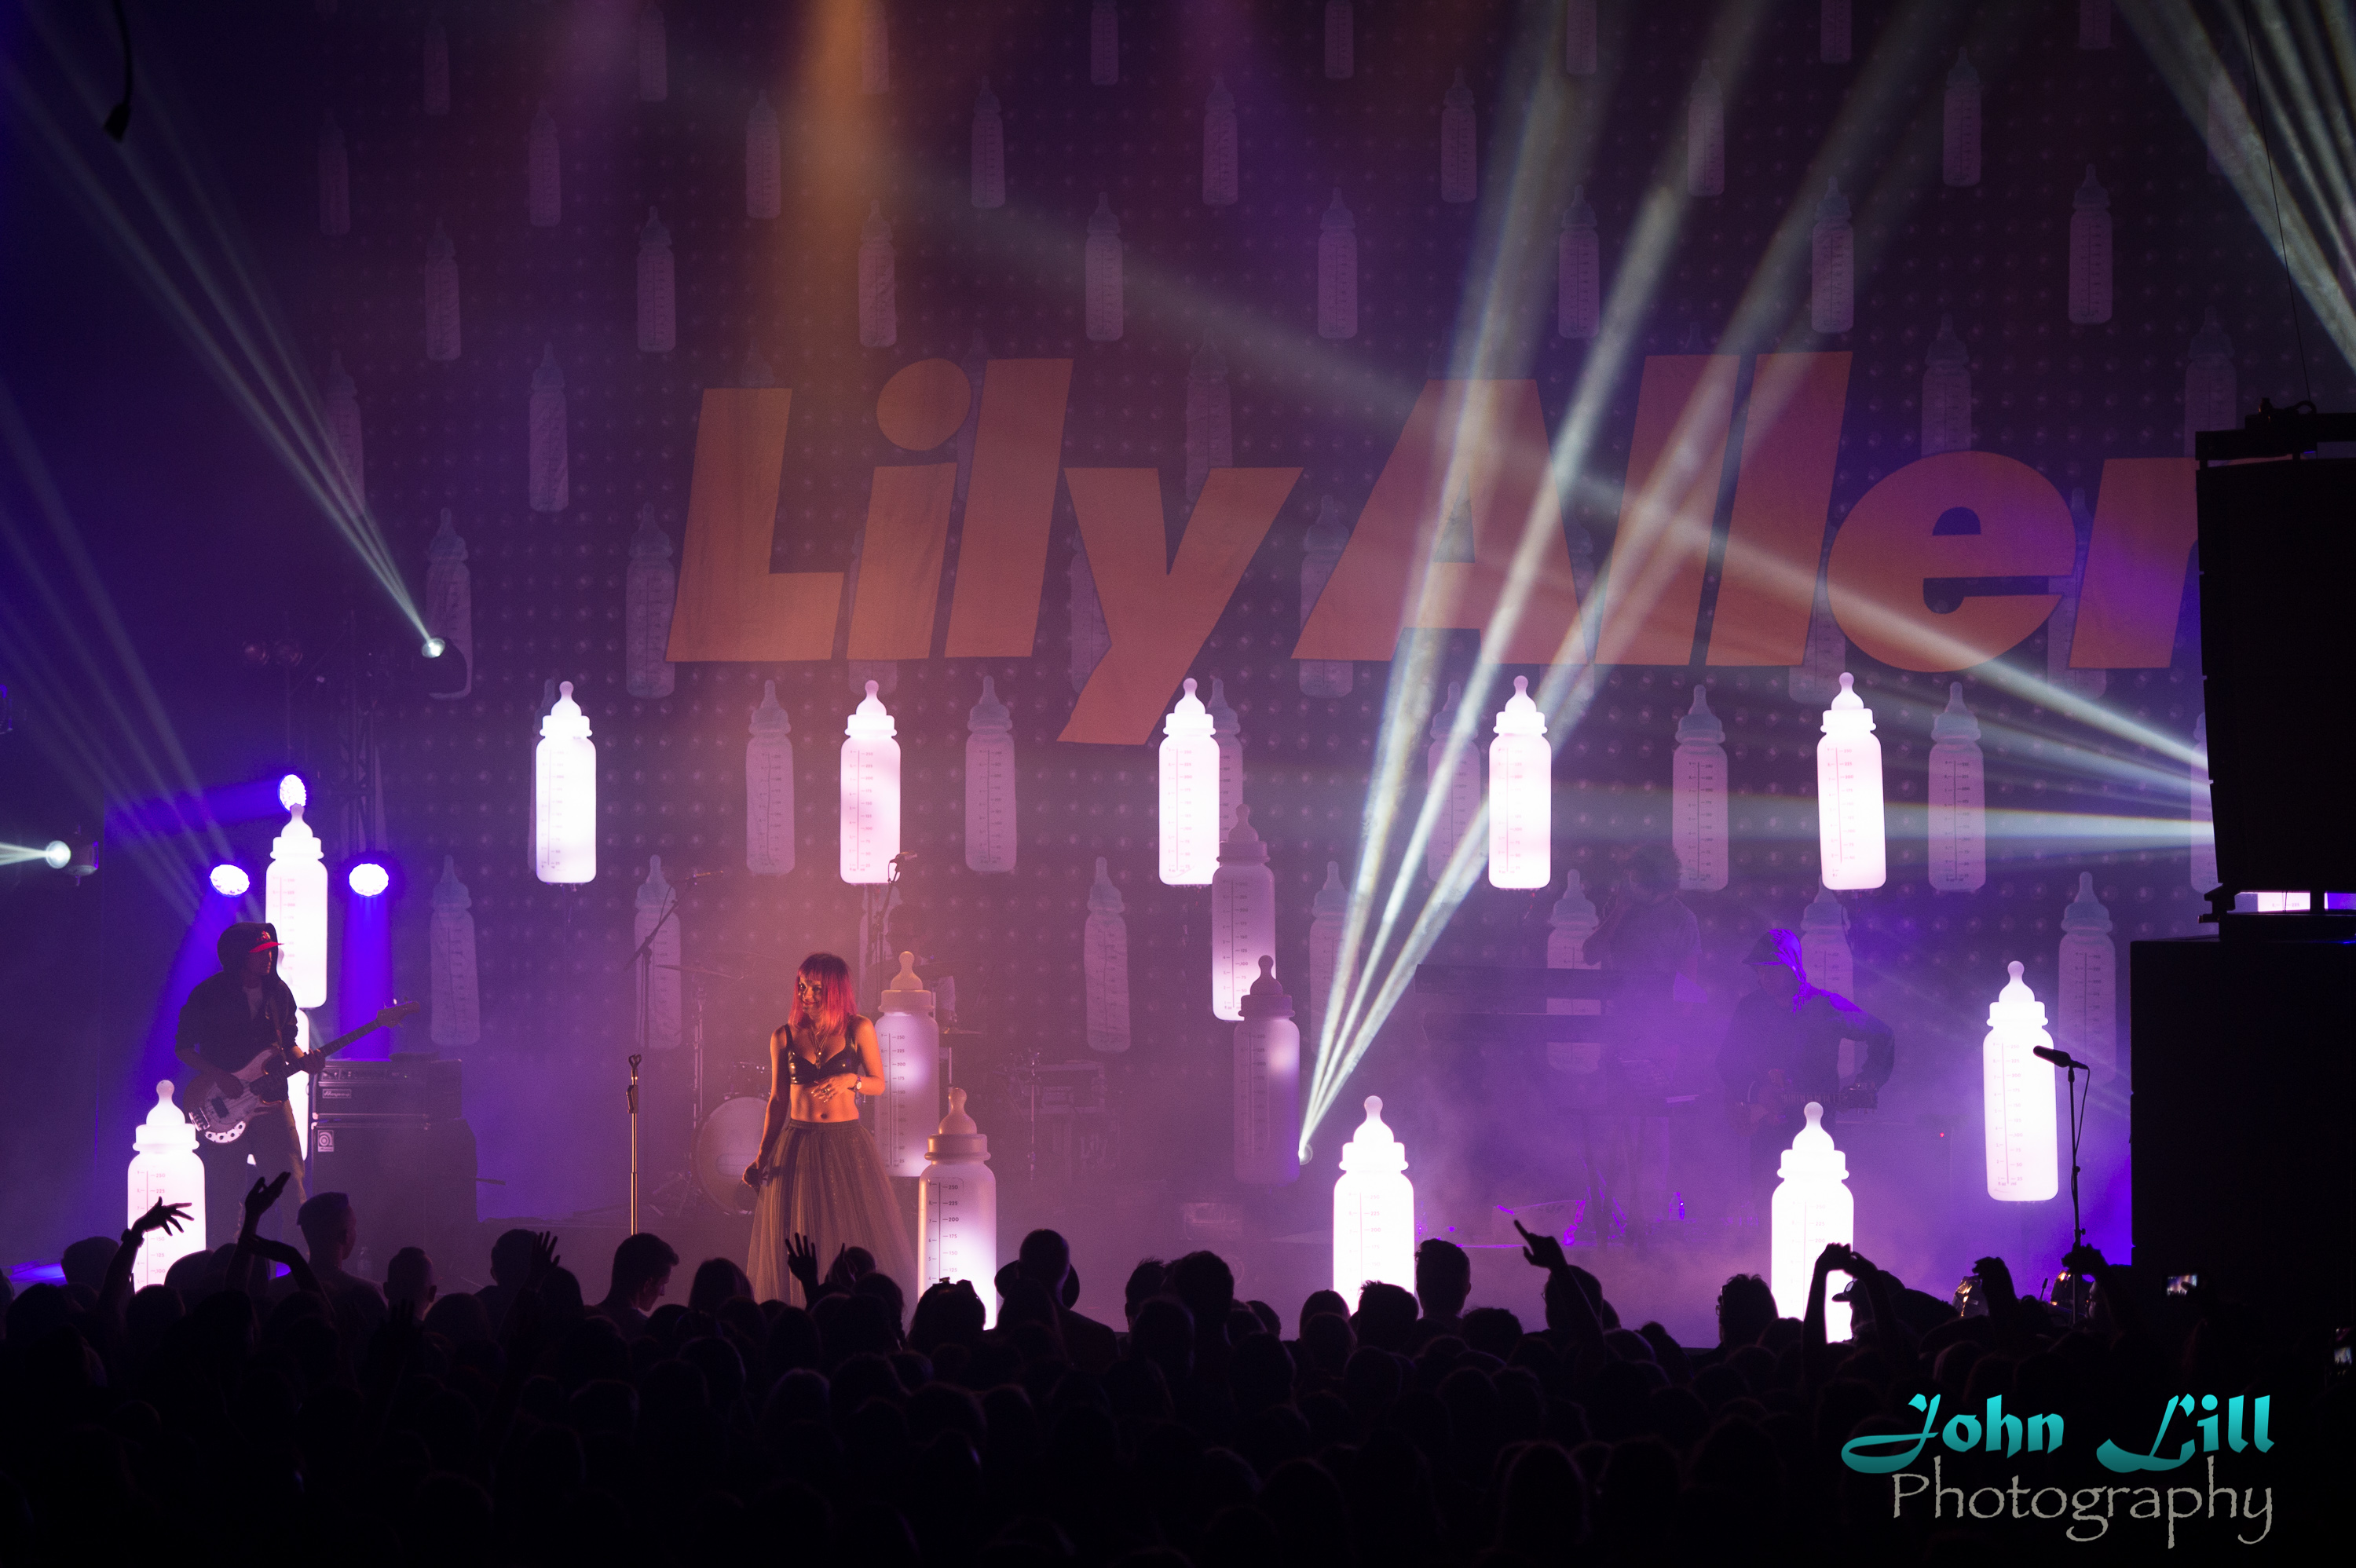 Lily Allen performs at the Paramount Theatre. Photo by John Lill